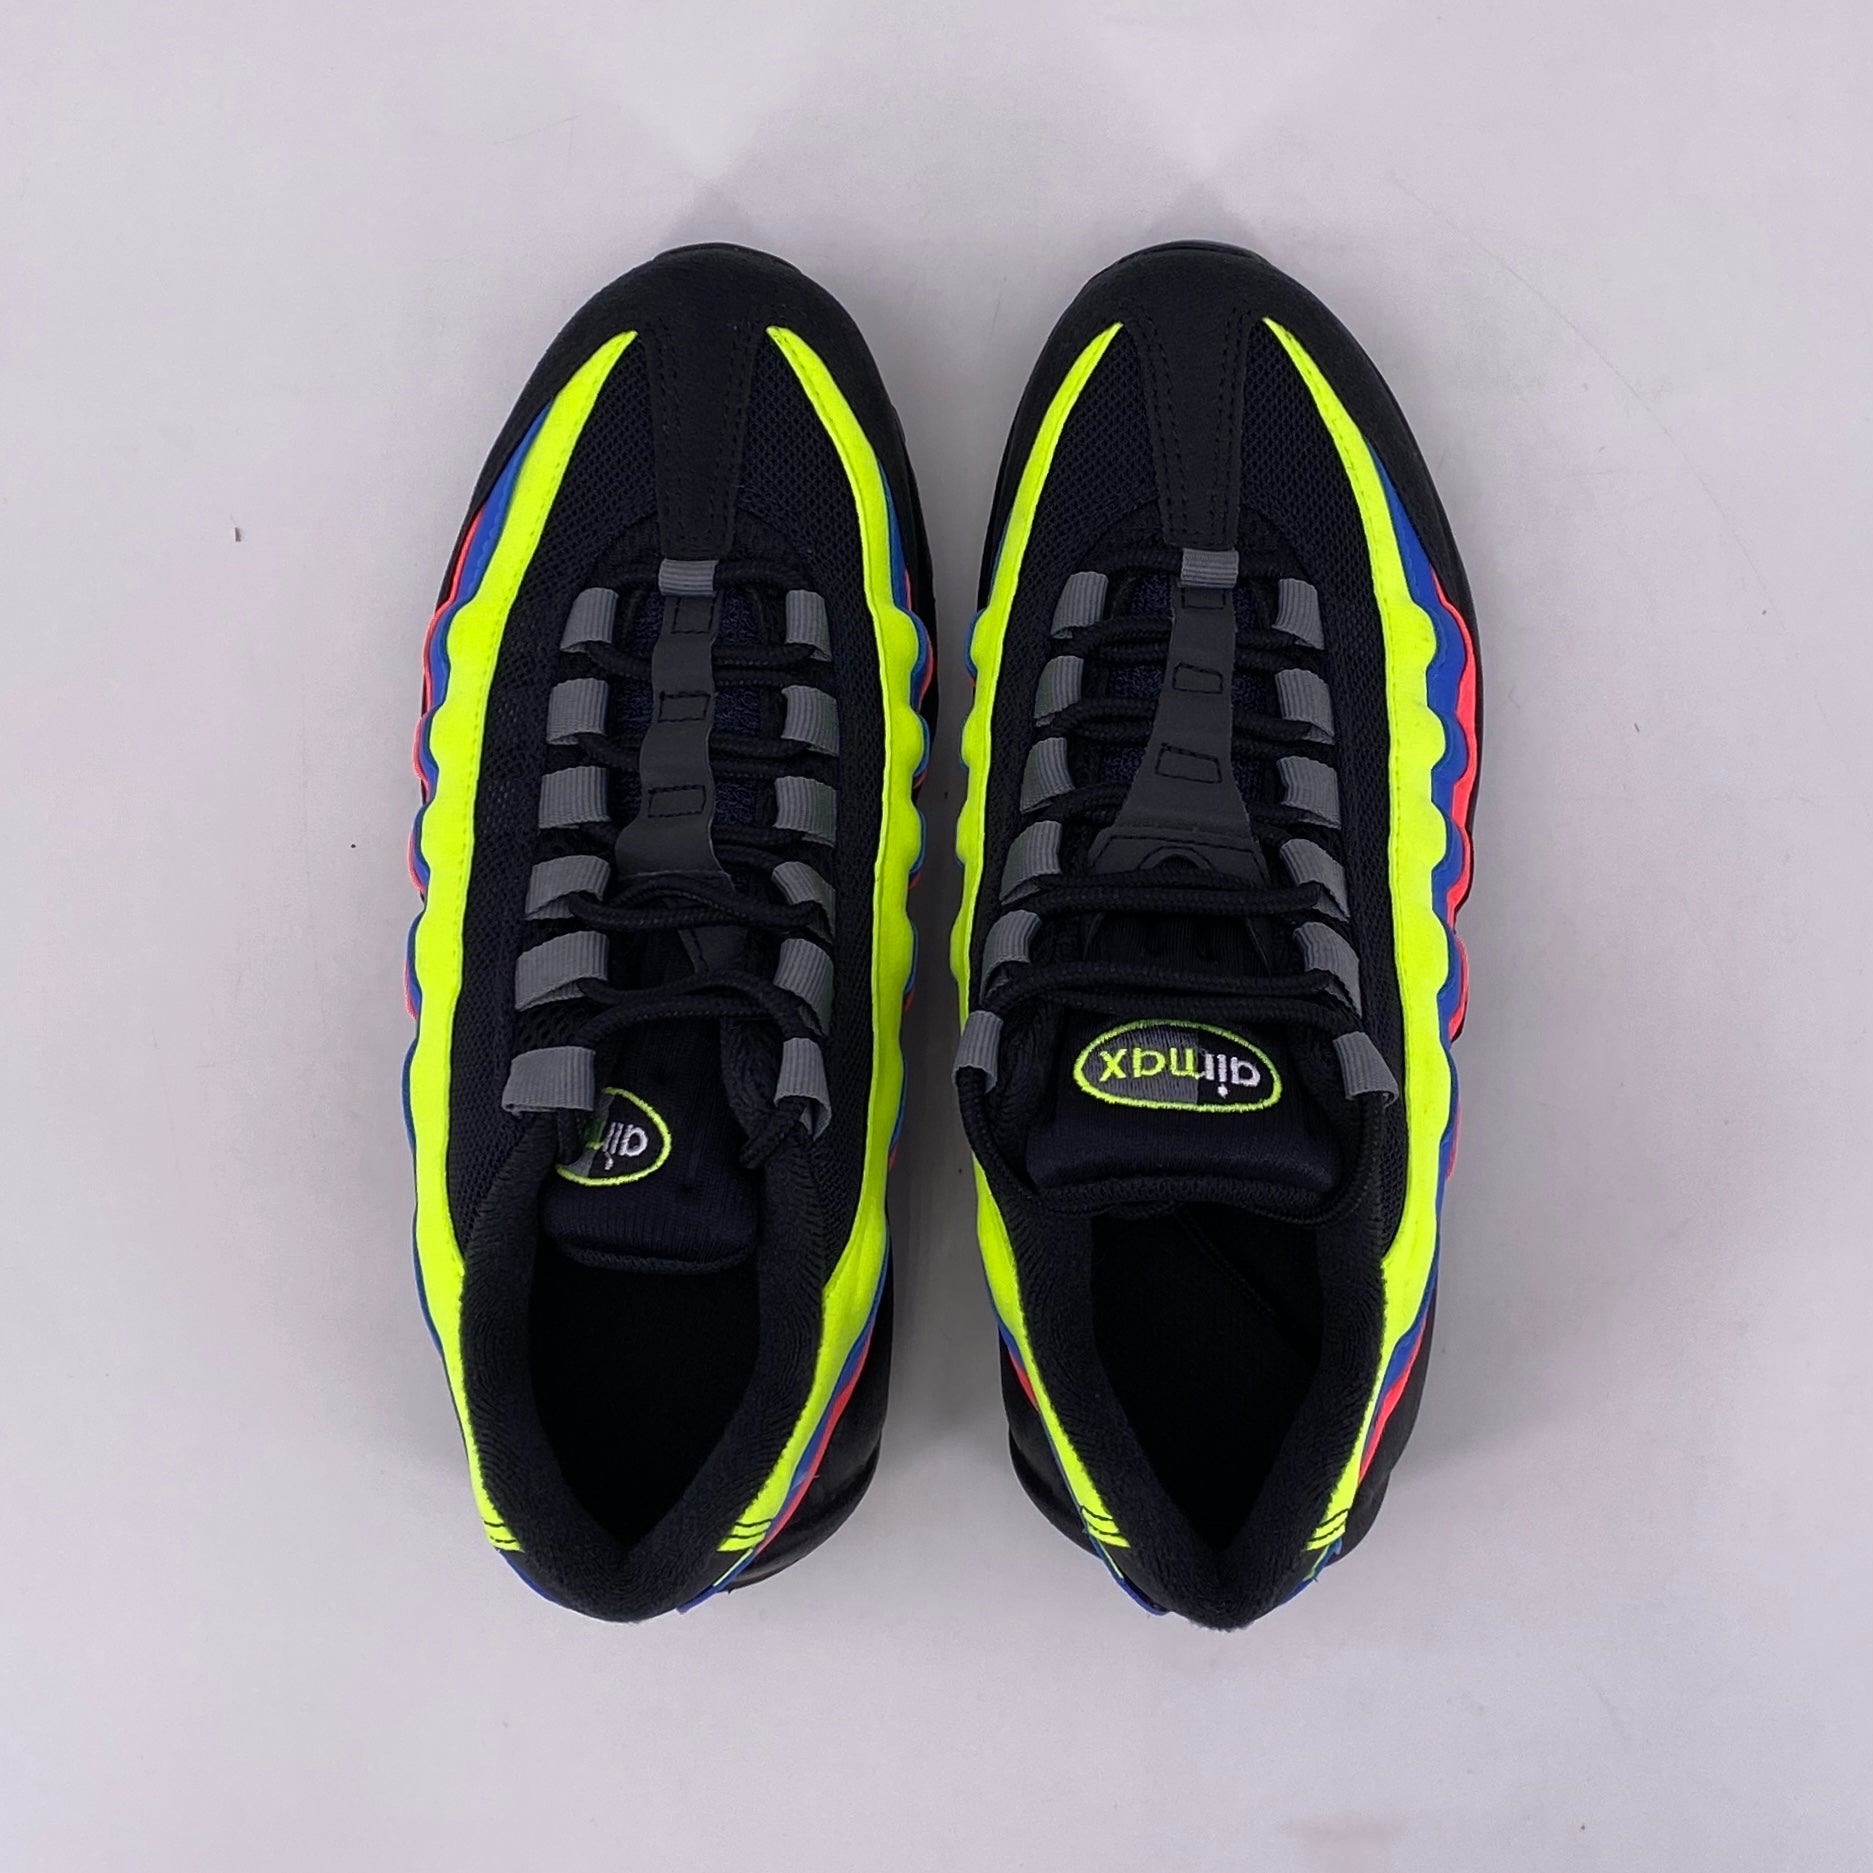 Nike (GS) Air Max 95 &quot;Black Neon&quot; 2022 New Size 5.5Y